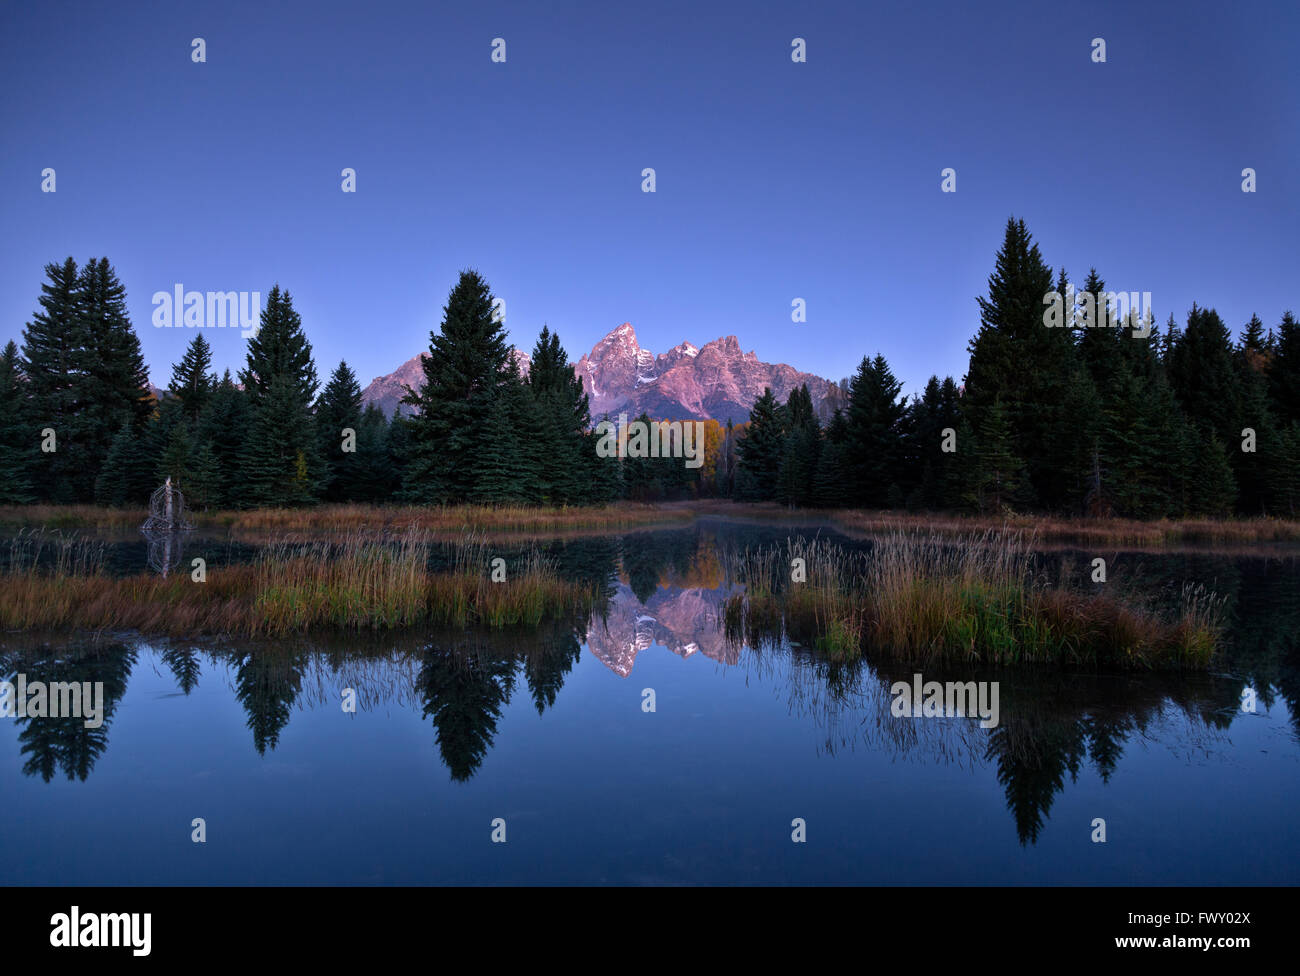 WY01478-00...WYOMING - Dawn at Schwabacher Landing on the Snake River in Grand Teton National Park. Stock Photo